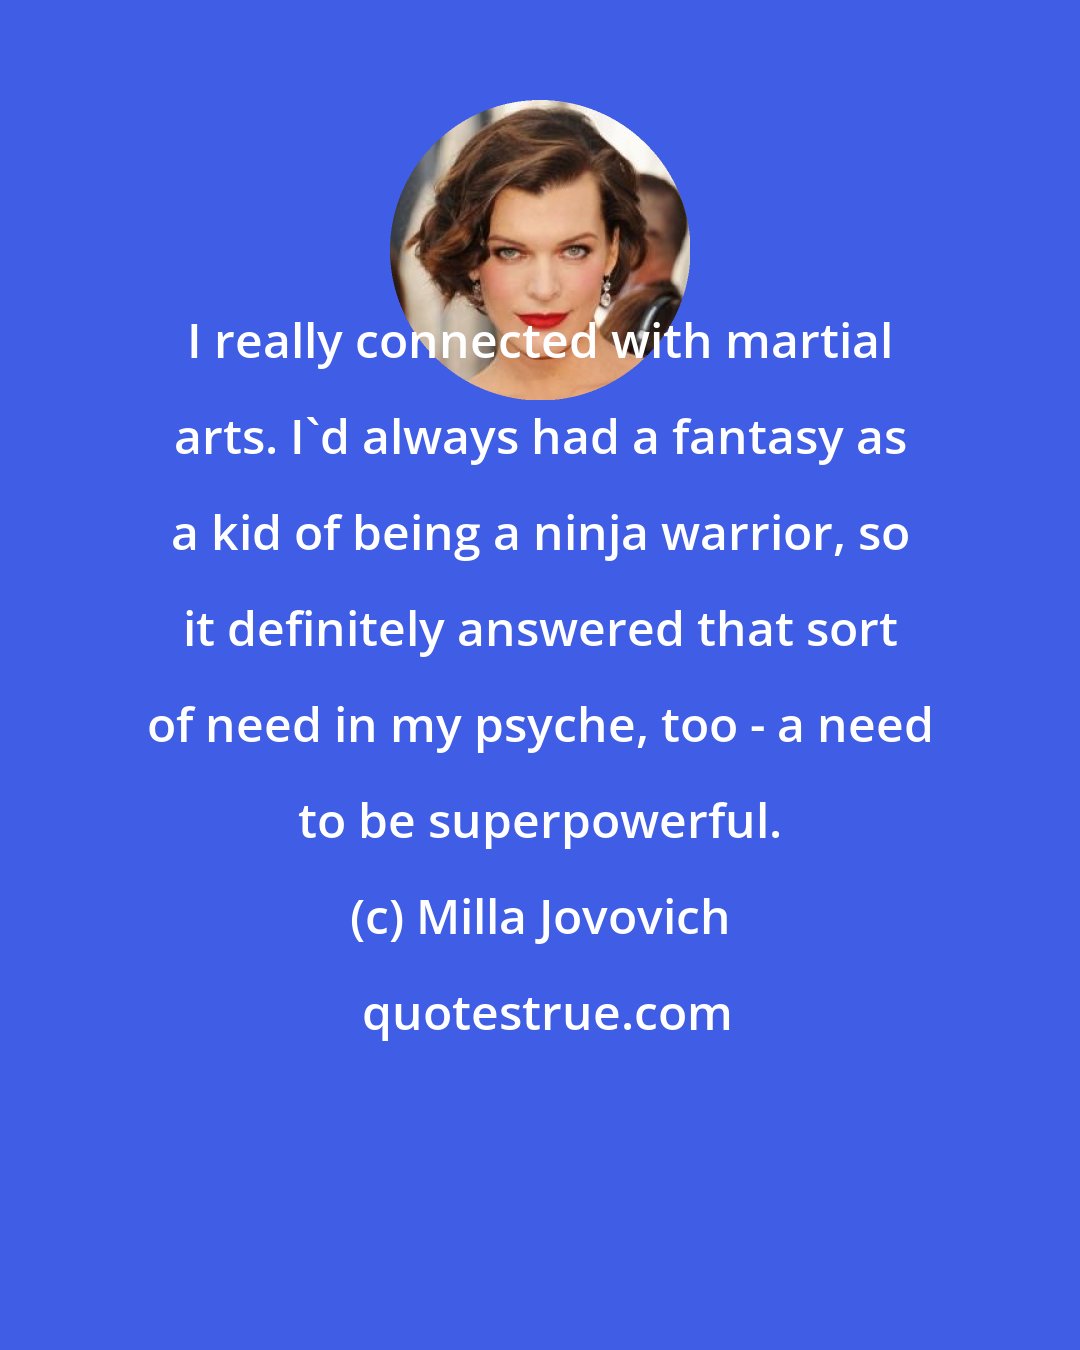 Milla Jovovich: I really connected with martial arts. I'd always had a fantasy as a kid of being a ninja warrior, so it definitely answered that sort of need in my psyche, too - a need to be superpowerful.